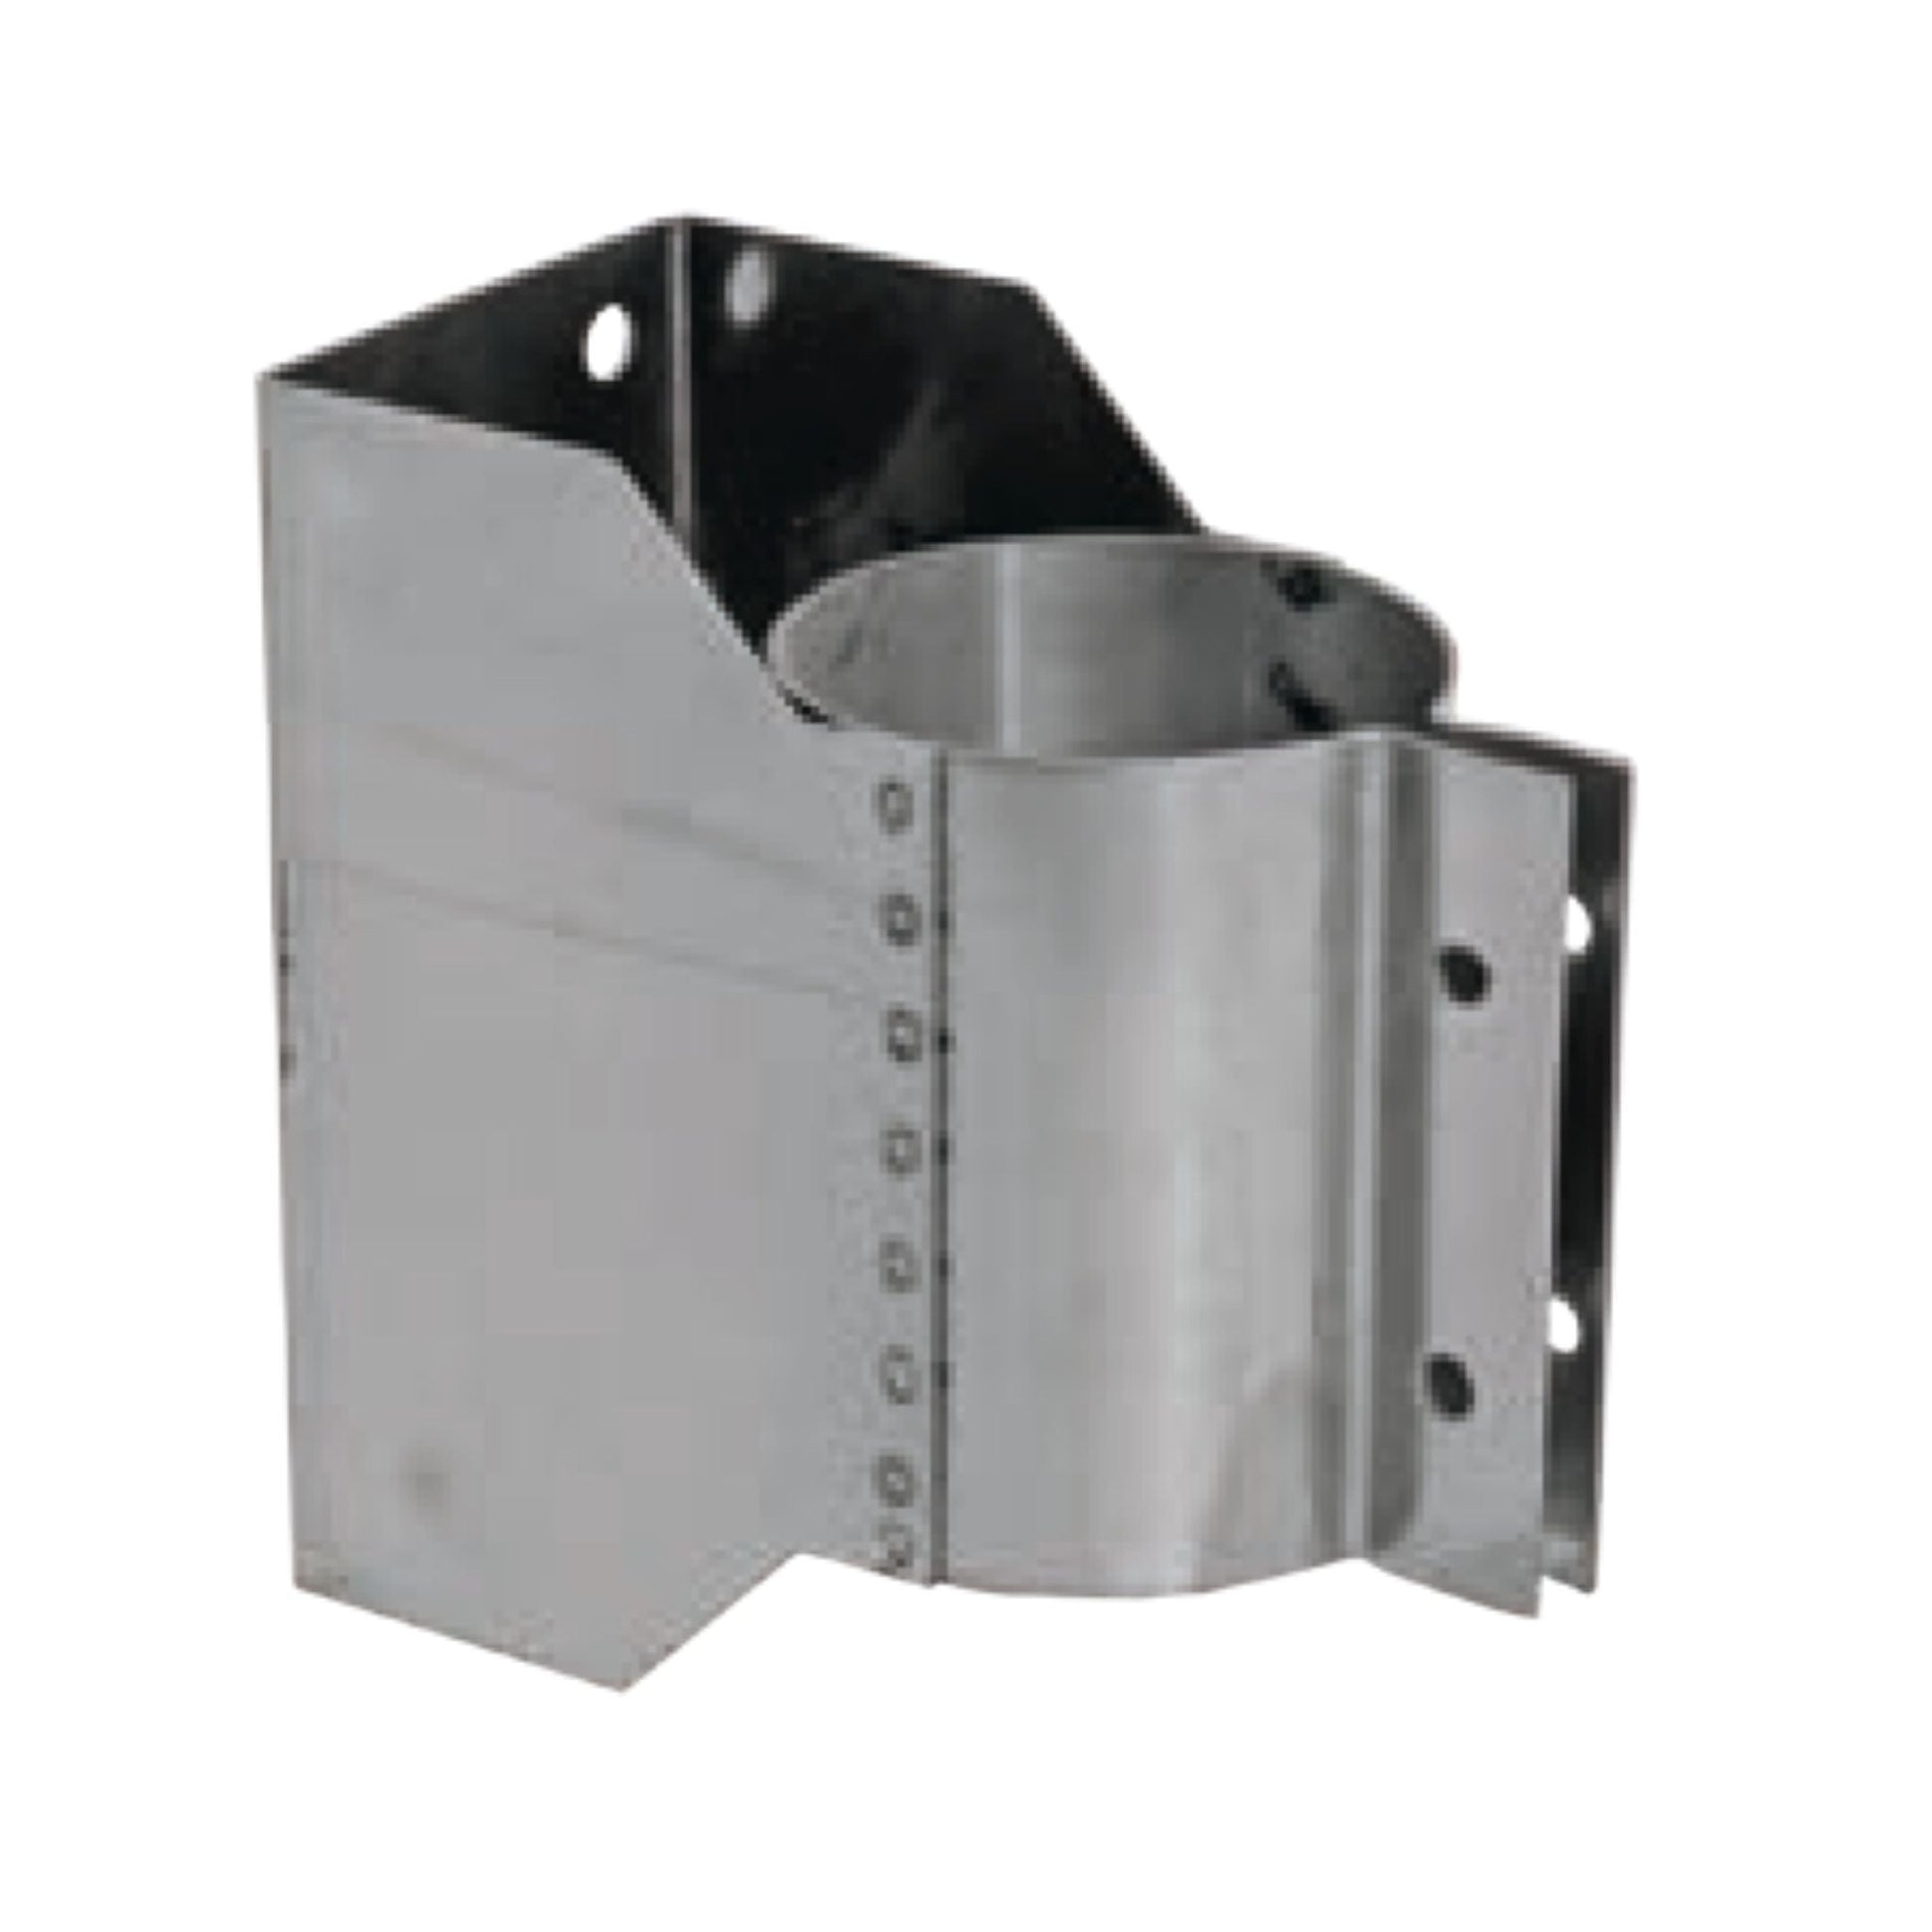 DuraVent FasNSeal 12" 29-4C Stainless Steel Wall Bracket